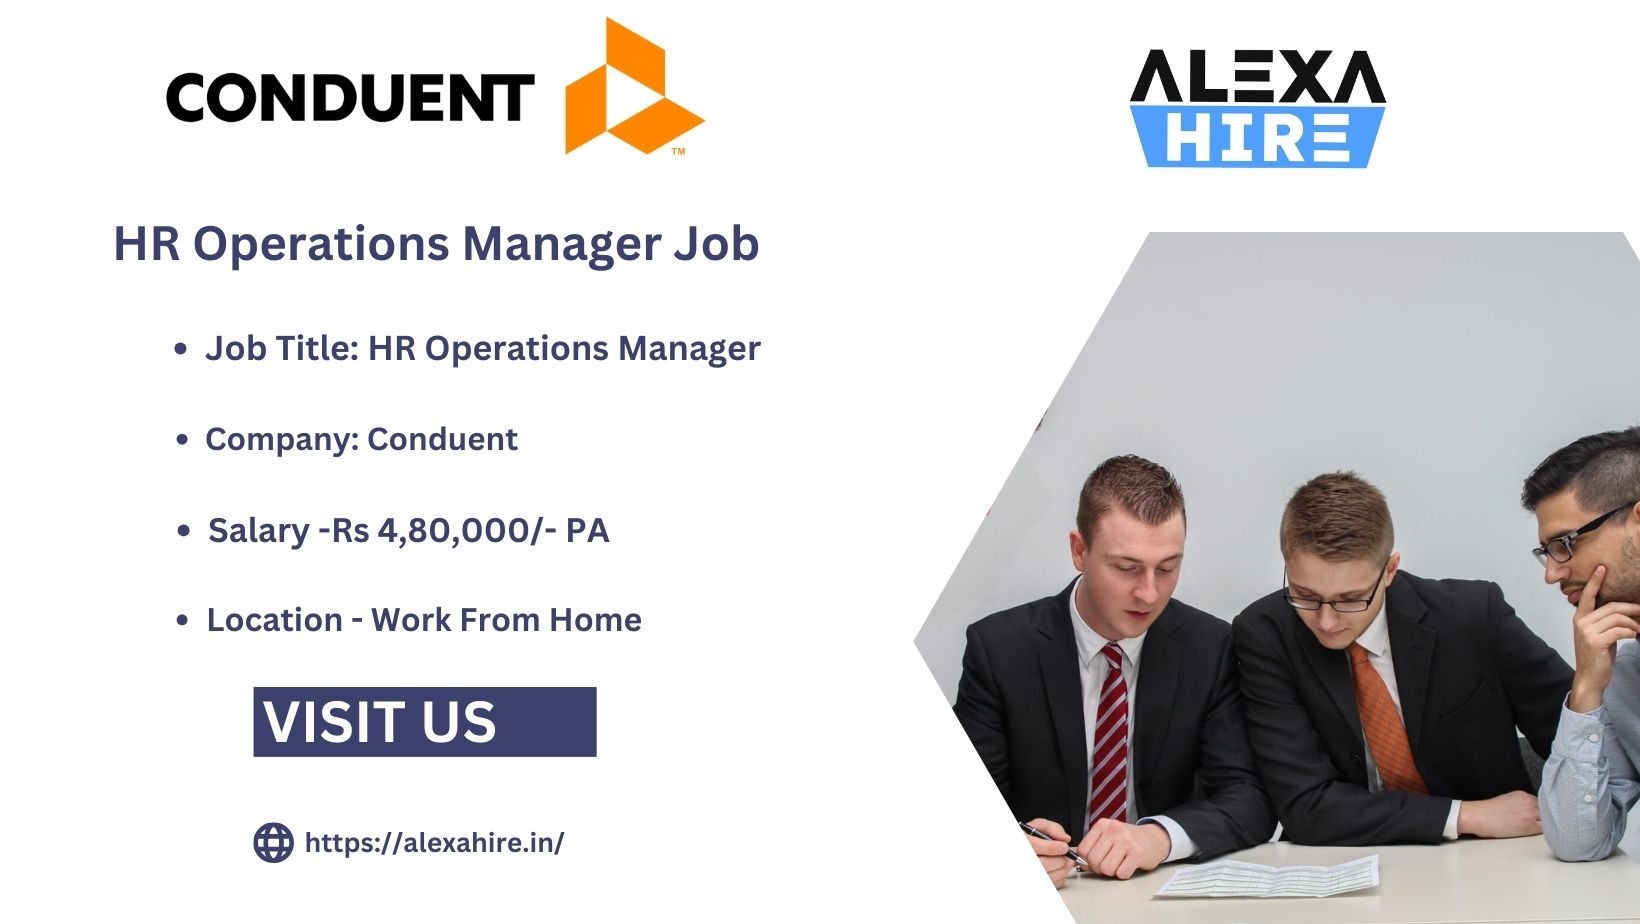 Conduent is Hiring HR Operations Manager Job Apply Right Now